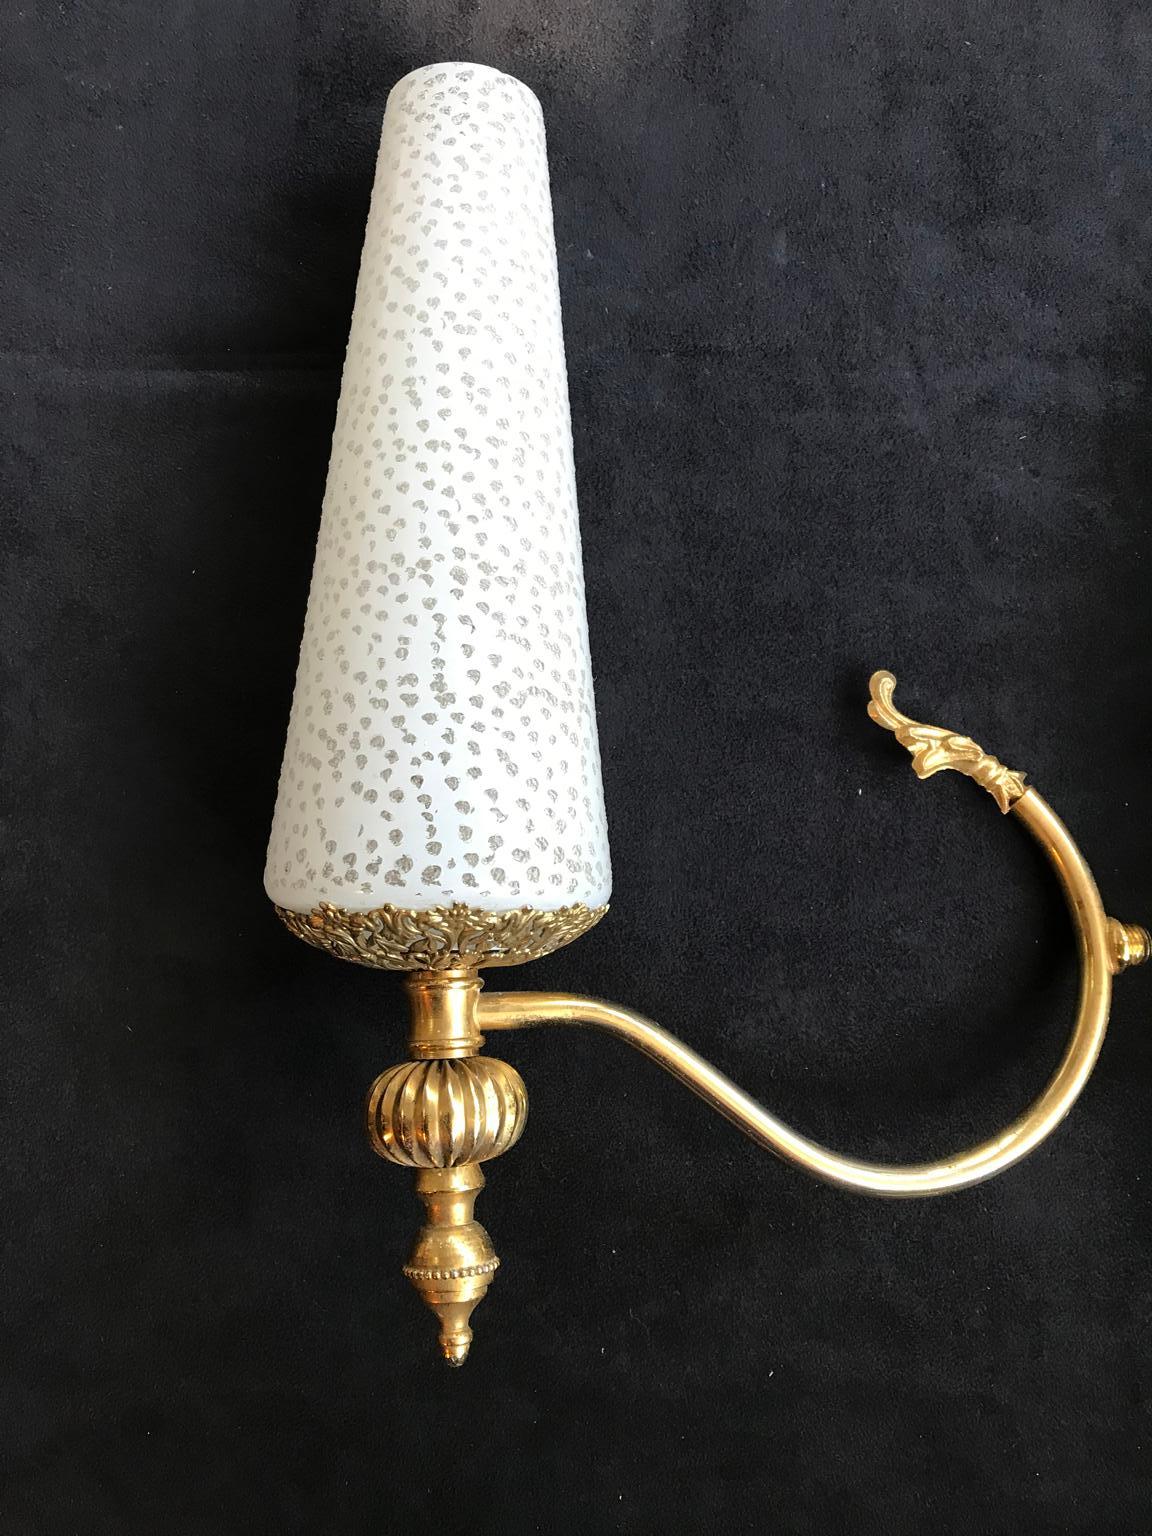 French pair of wall lamp sconces in gilt metal and decorated white glasses. Midcentury style.
Measures: Support diameter 1 cm
Weight: 0.8 Kg.